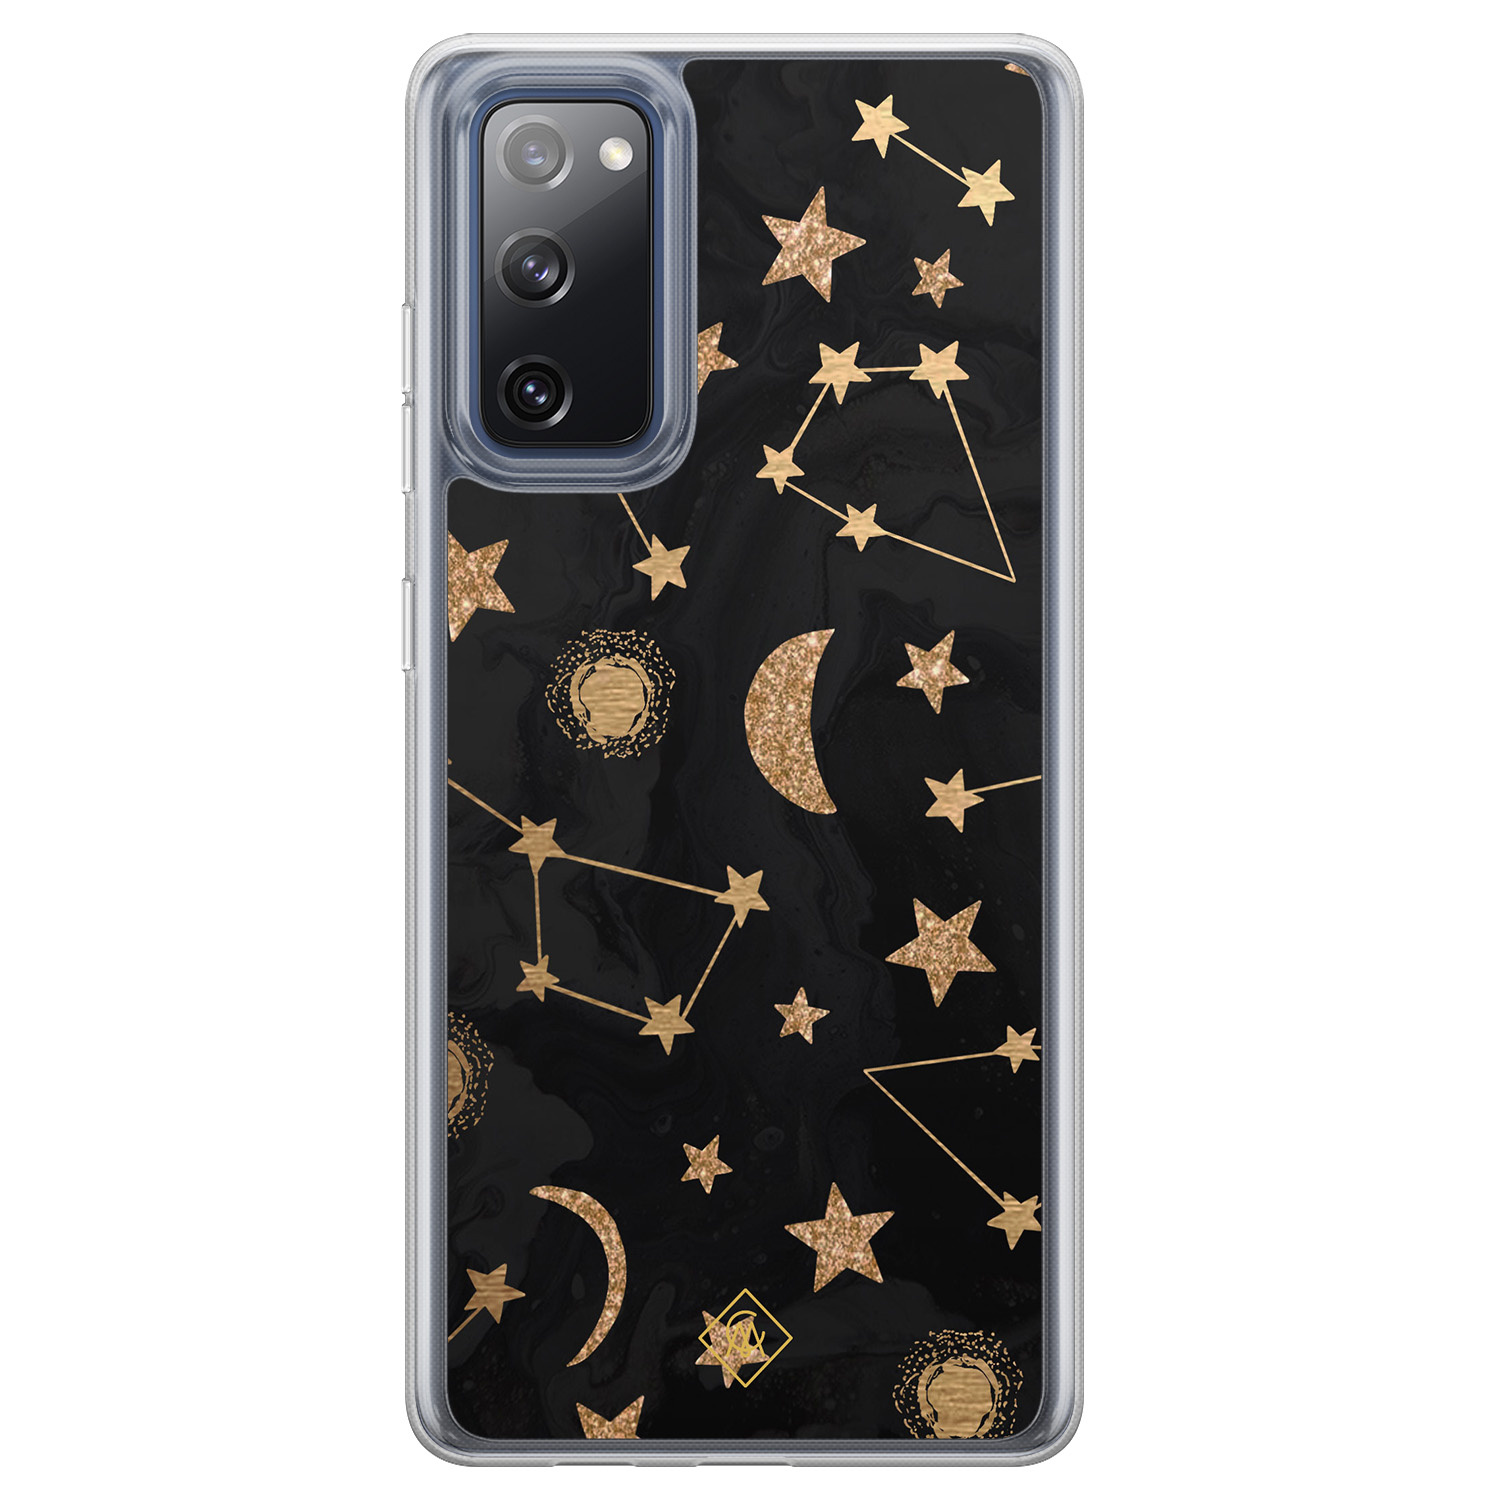 Samsung Galaxy S20 FE hybride hoesje - Counting the stars